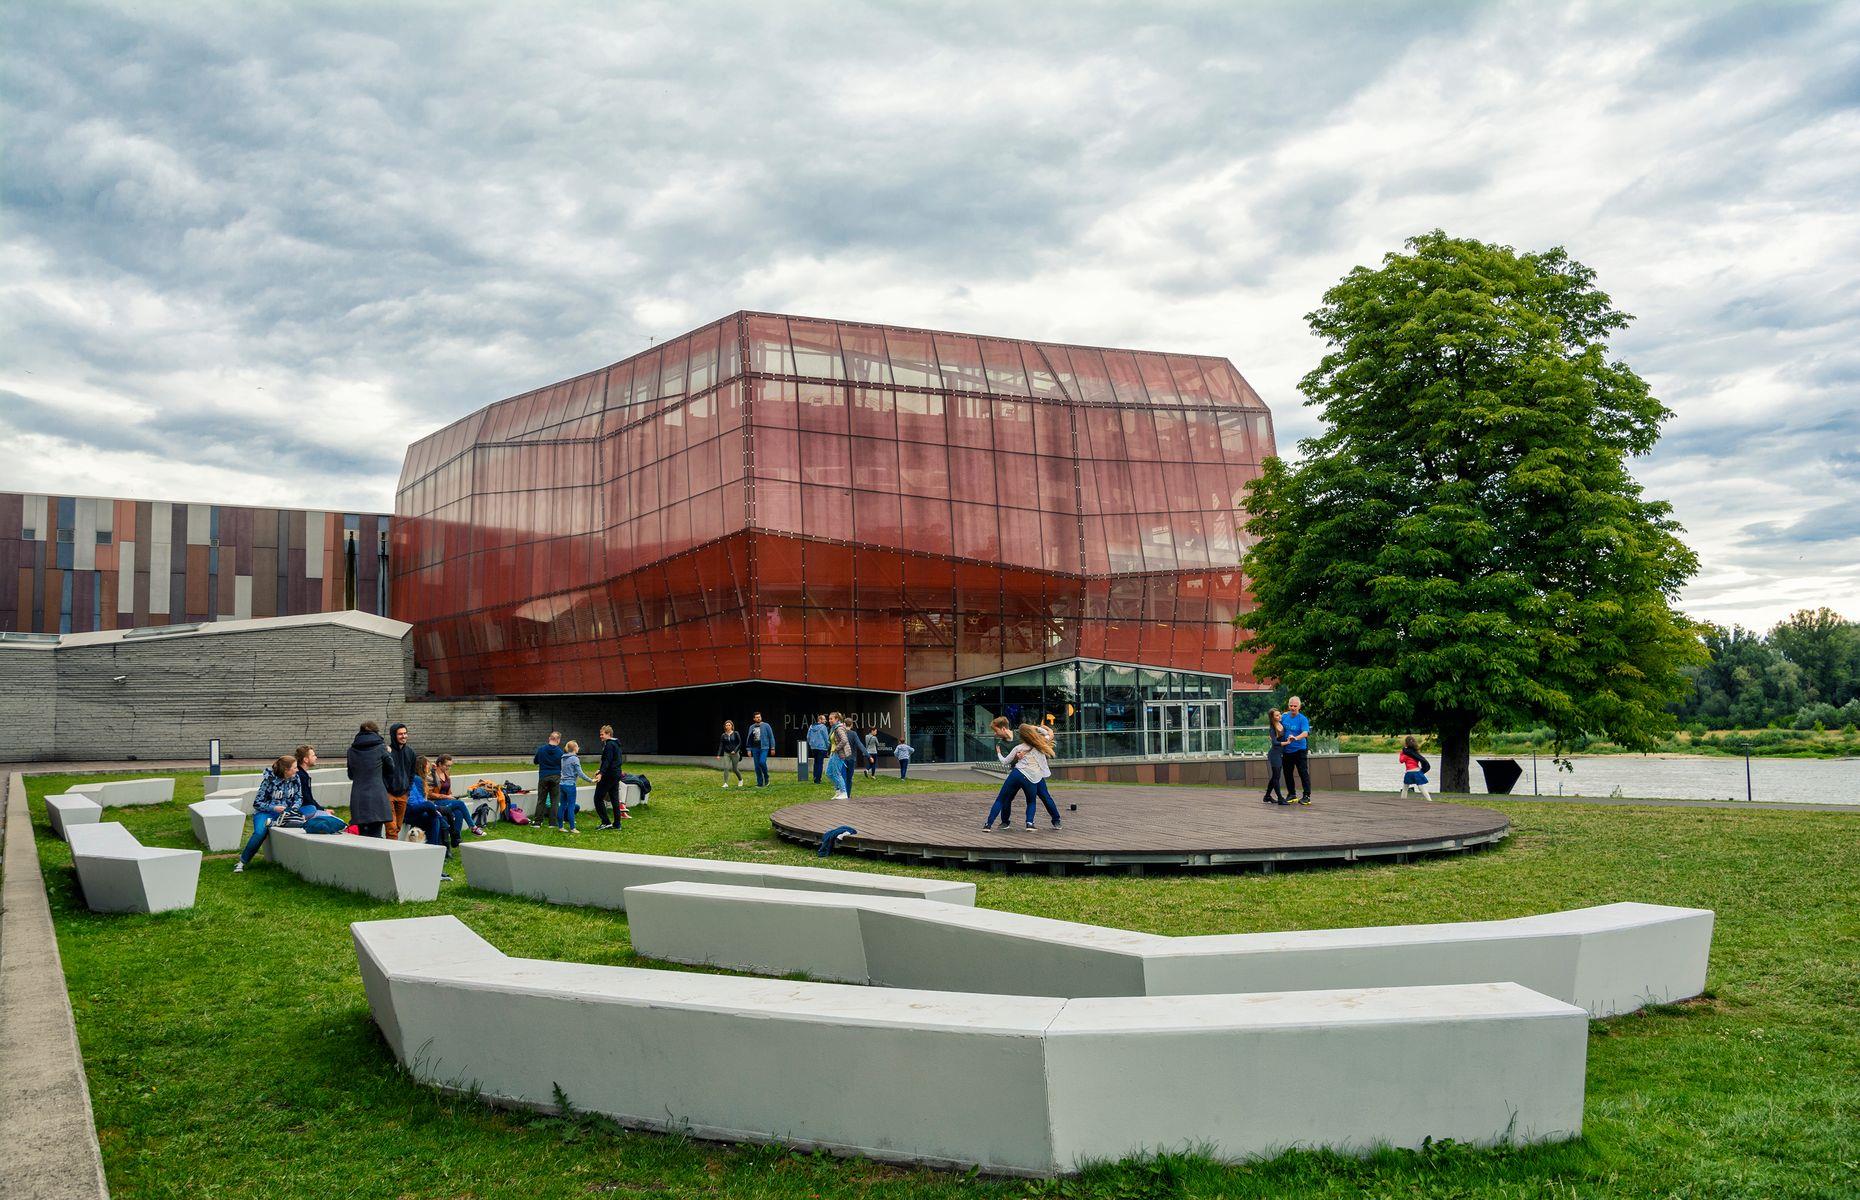 <p>The solar system is usually one of the coolest topics at school, so where better to take the kids than a planetarium? Warsaw’s <a href="https://www.kopernik.org.pl/en">Planetarium at the Copernicus Science Centre</a> is one of the most modern planetariums in Europe and screens both 2D and 3D films in English, taking kids of all ages on a tour of the solar system, the International Space Station and outer space. Want to get a bit more involved? There are 400 fascinating exhibitions and interactive displays inside the wider science center.</p>  <p><a href="https://www.facebook.com/loveexploringUK?utm_source=msn&utm_medium=social&utm_campaign=front"><strong>Love this? Follow us on Facebook for more travel inspiration</strong></a></p>